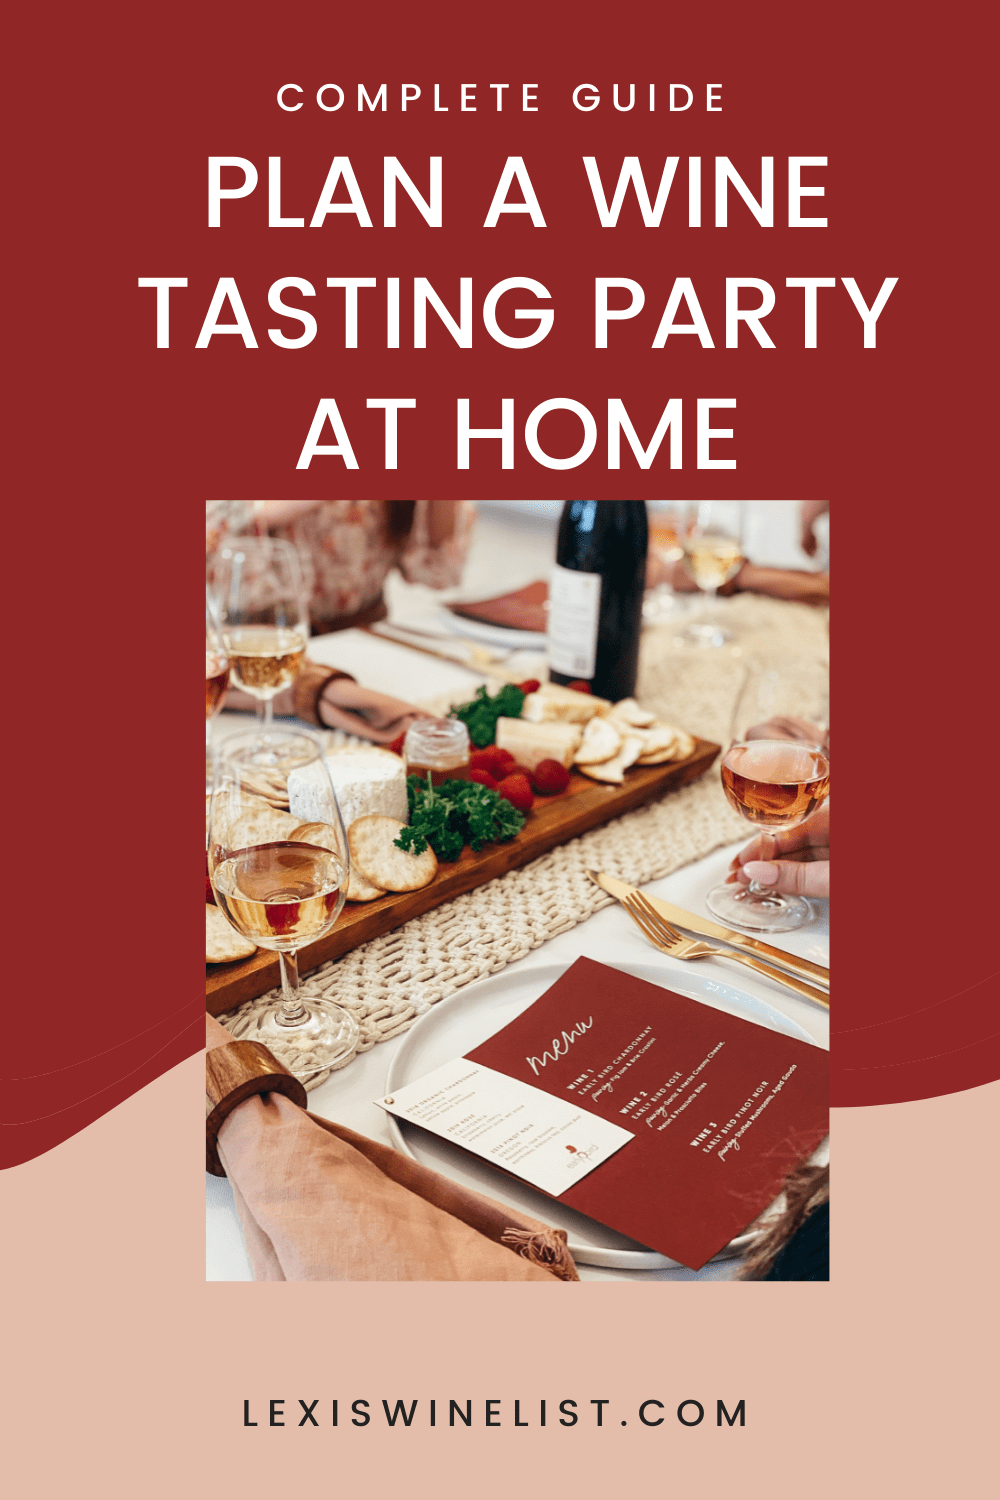 How to Plan a Wine Tasting Party